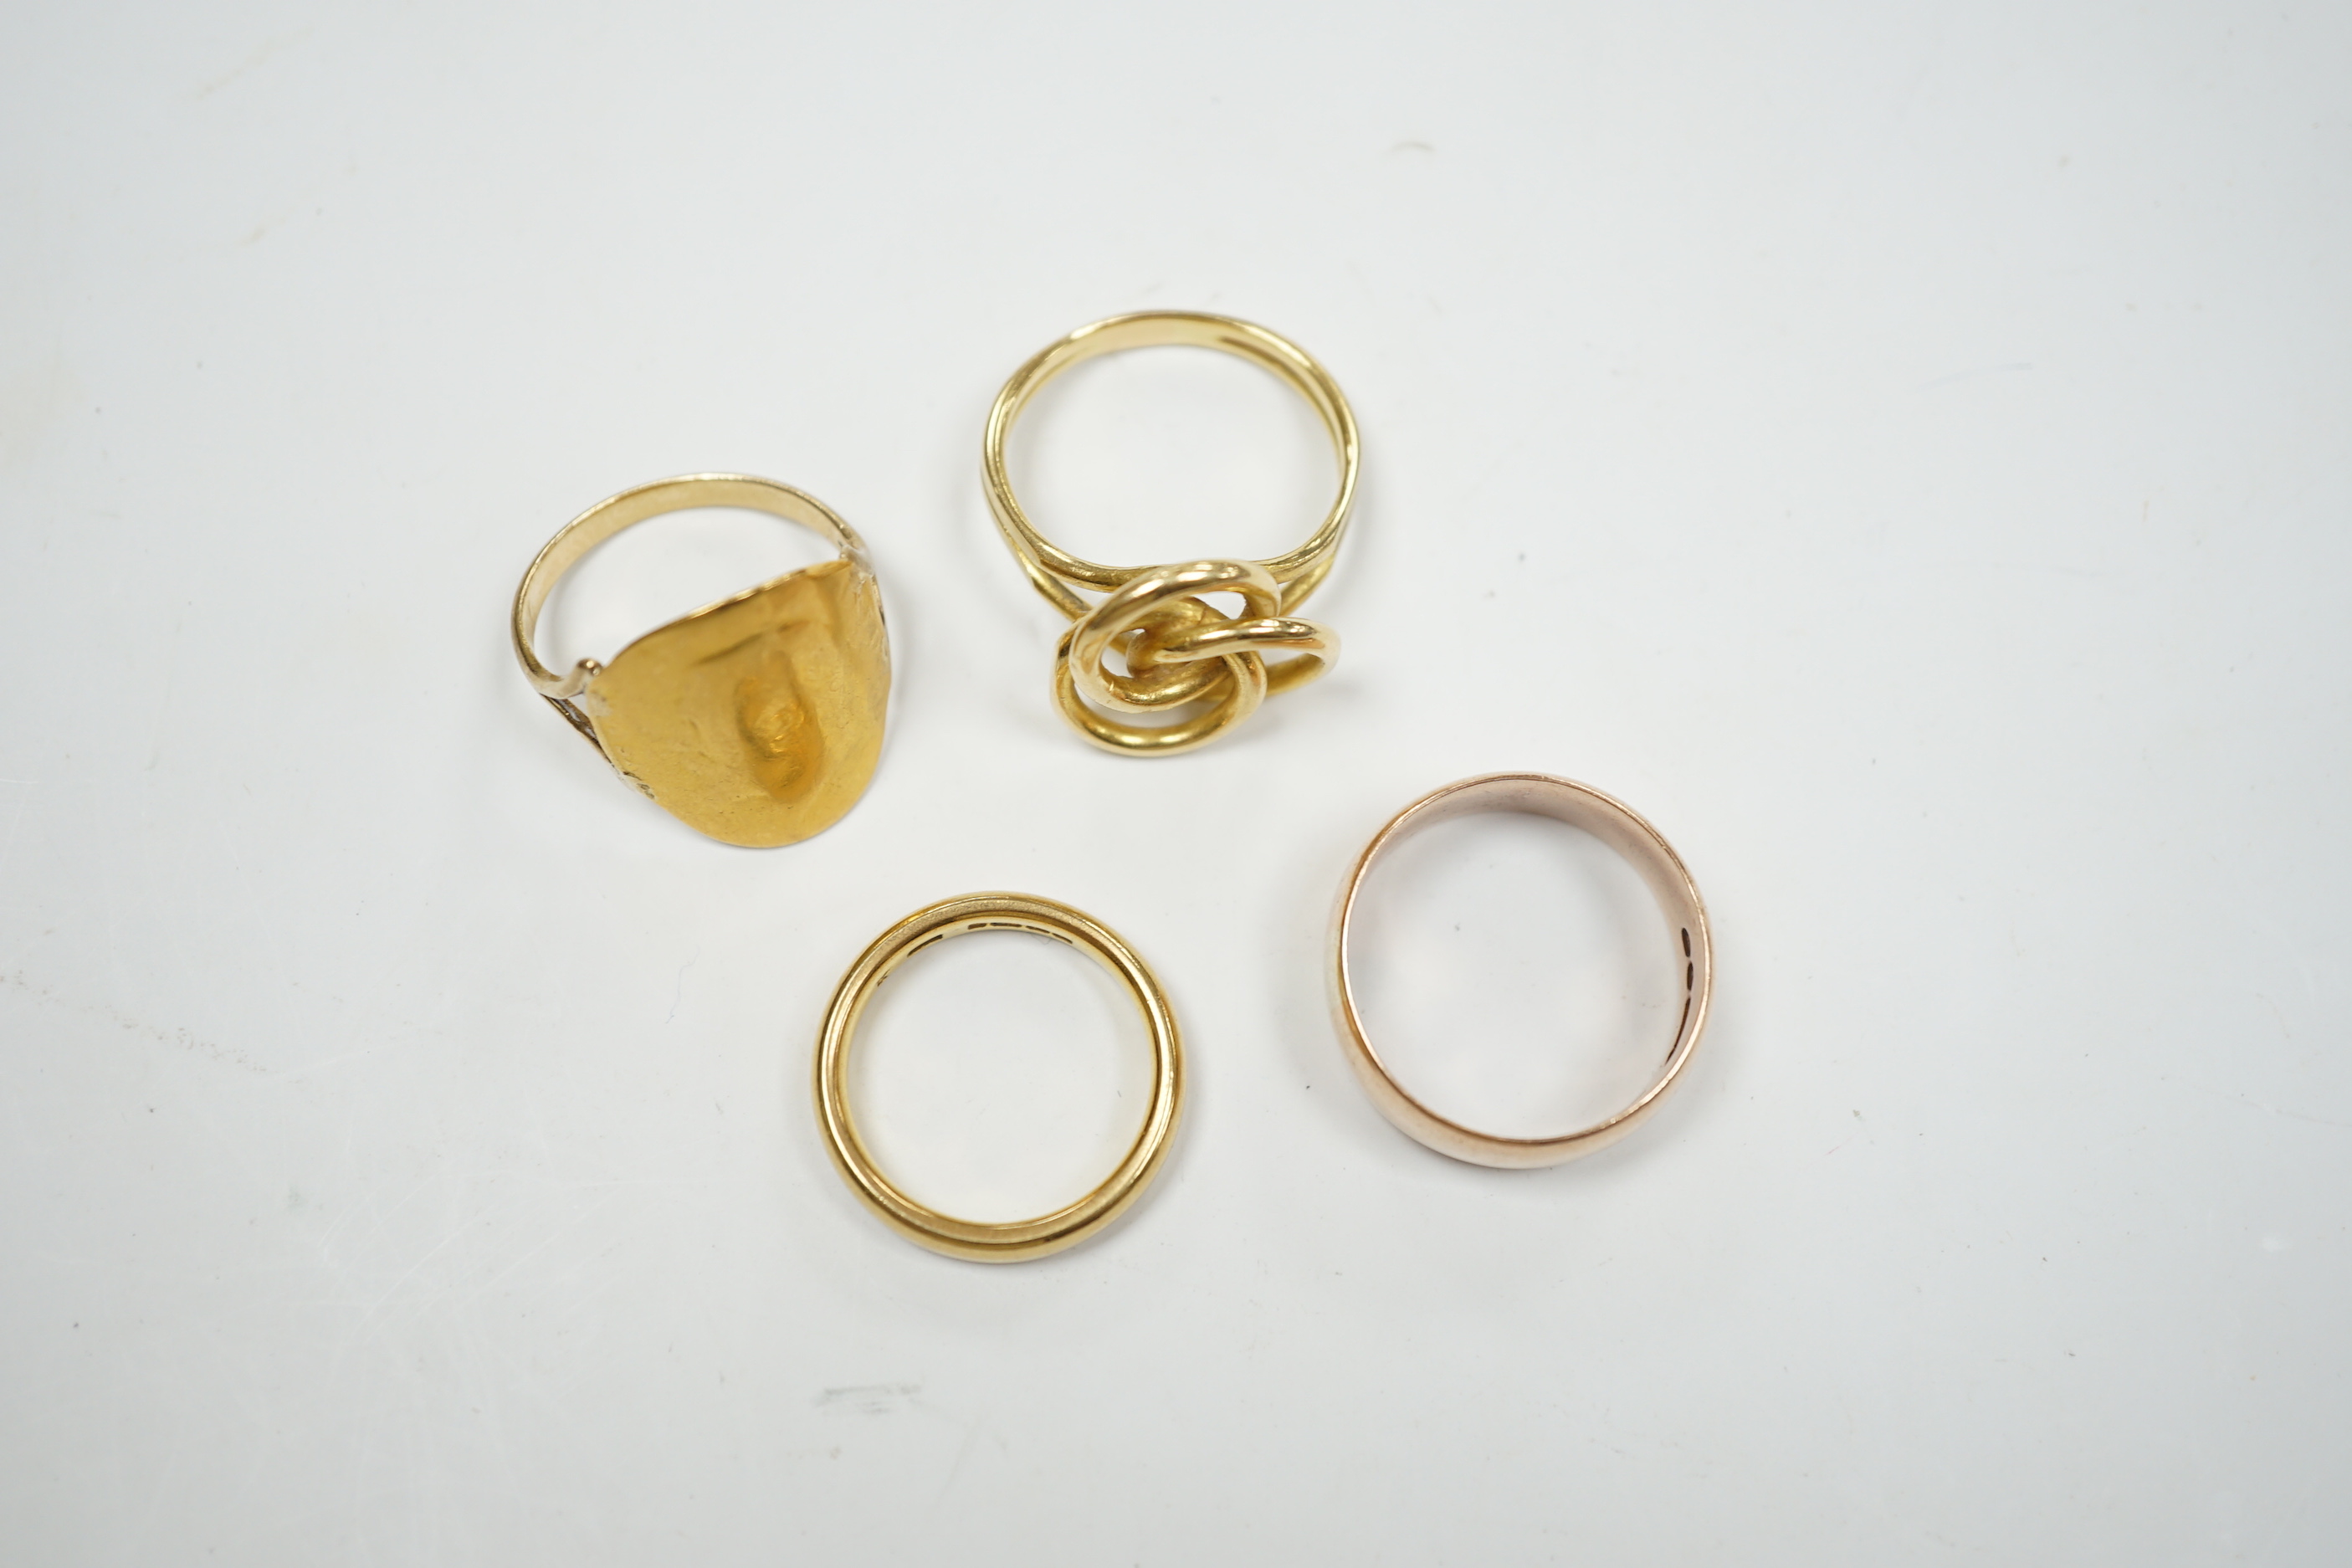 A 1930's 22ct gold wedding band, 5.9 grams, a 9ct gold wedding band, 5.1 grams and two other yellow metal rings, 10.1 grams.